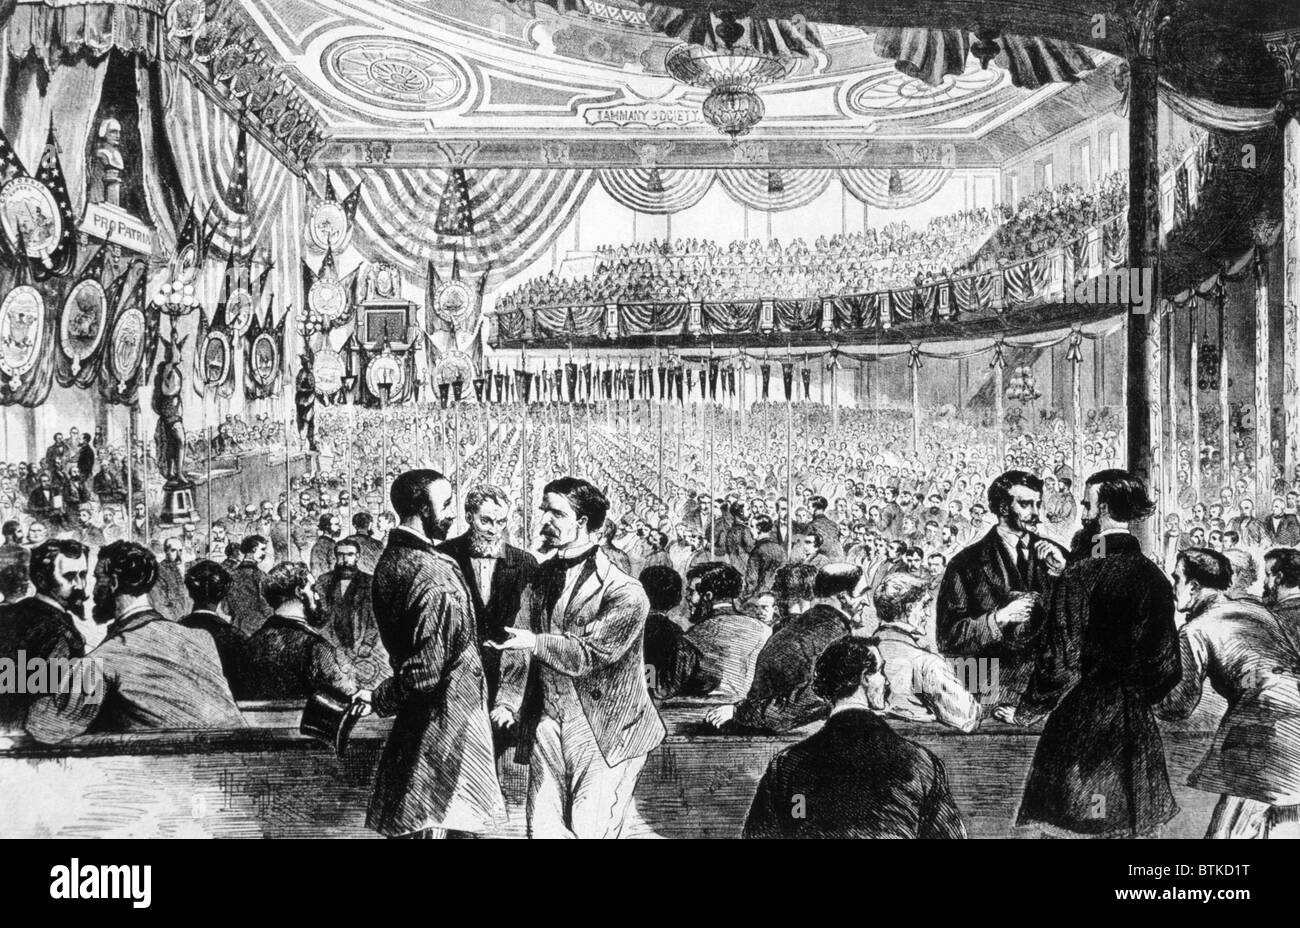 John A. Logan of Illinois nominates Ulysses S. Grant for president at the Republican national convention in Chicago, 1868 Stock Photo